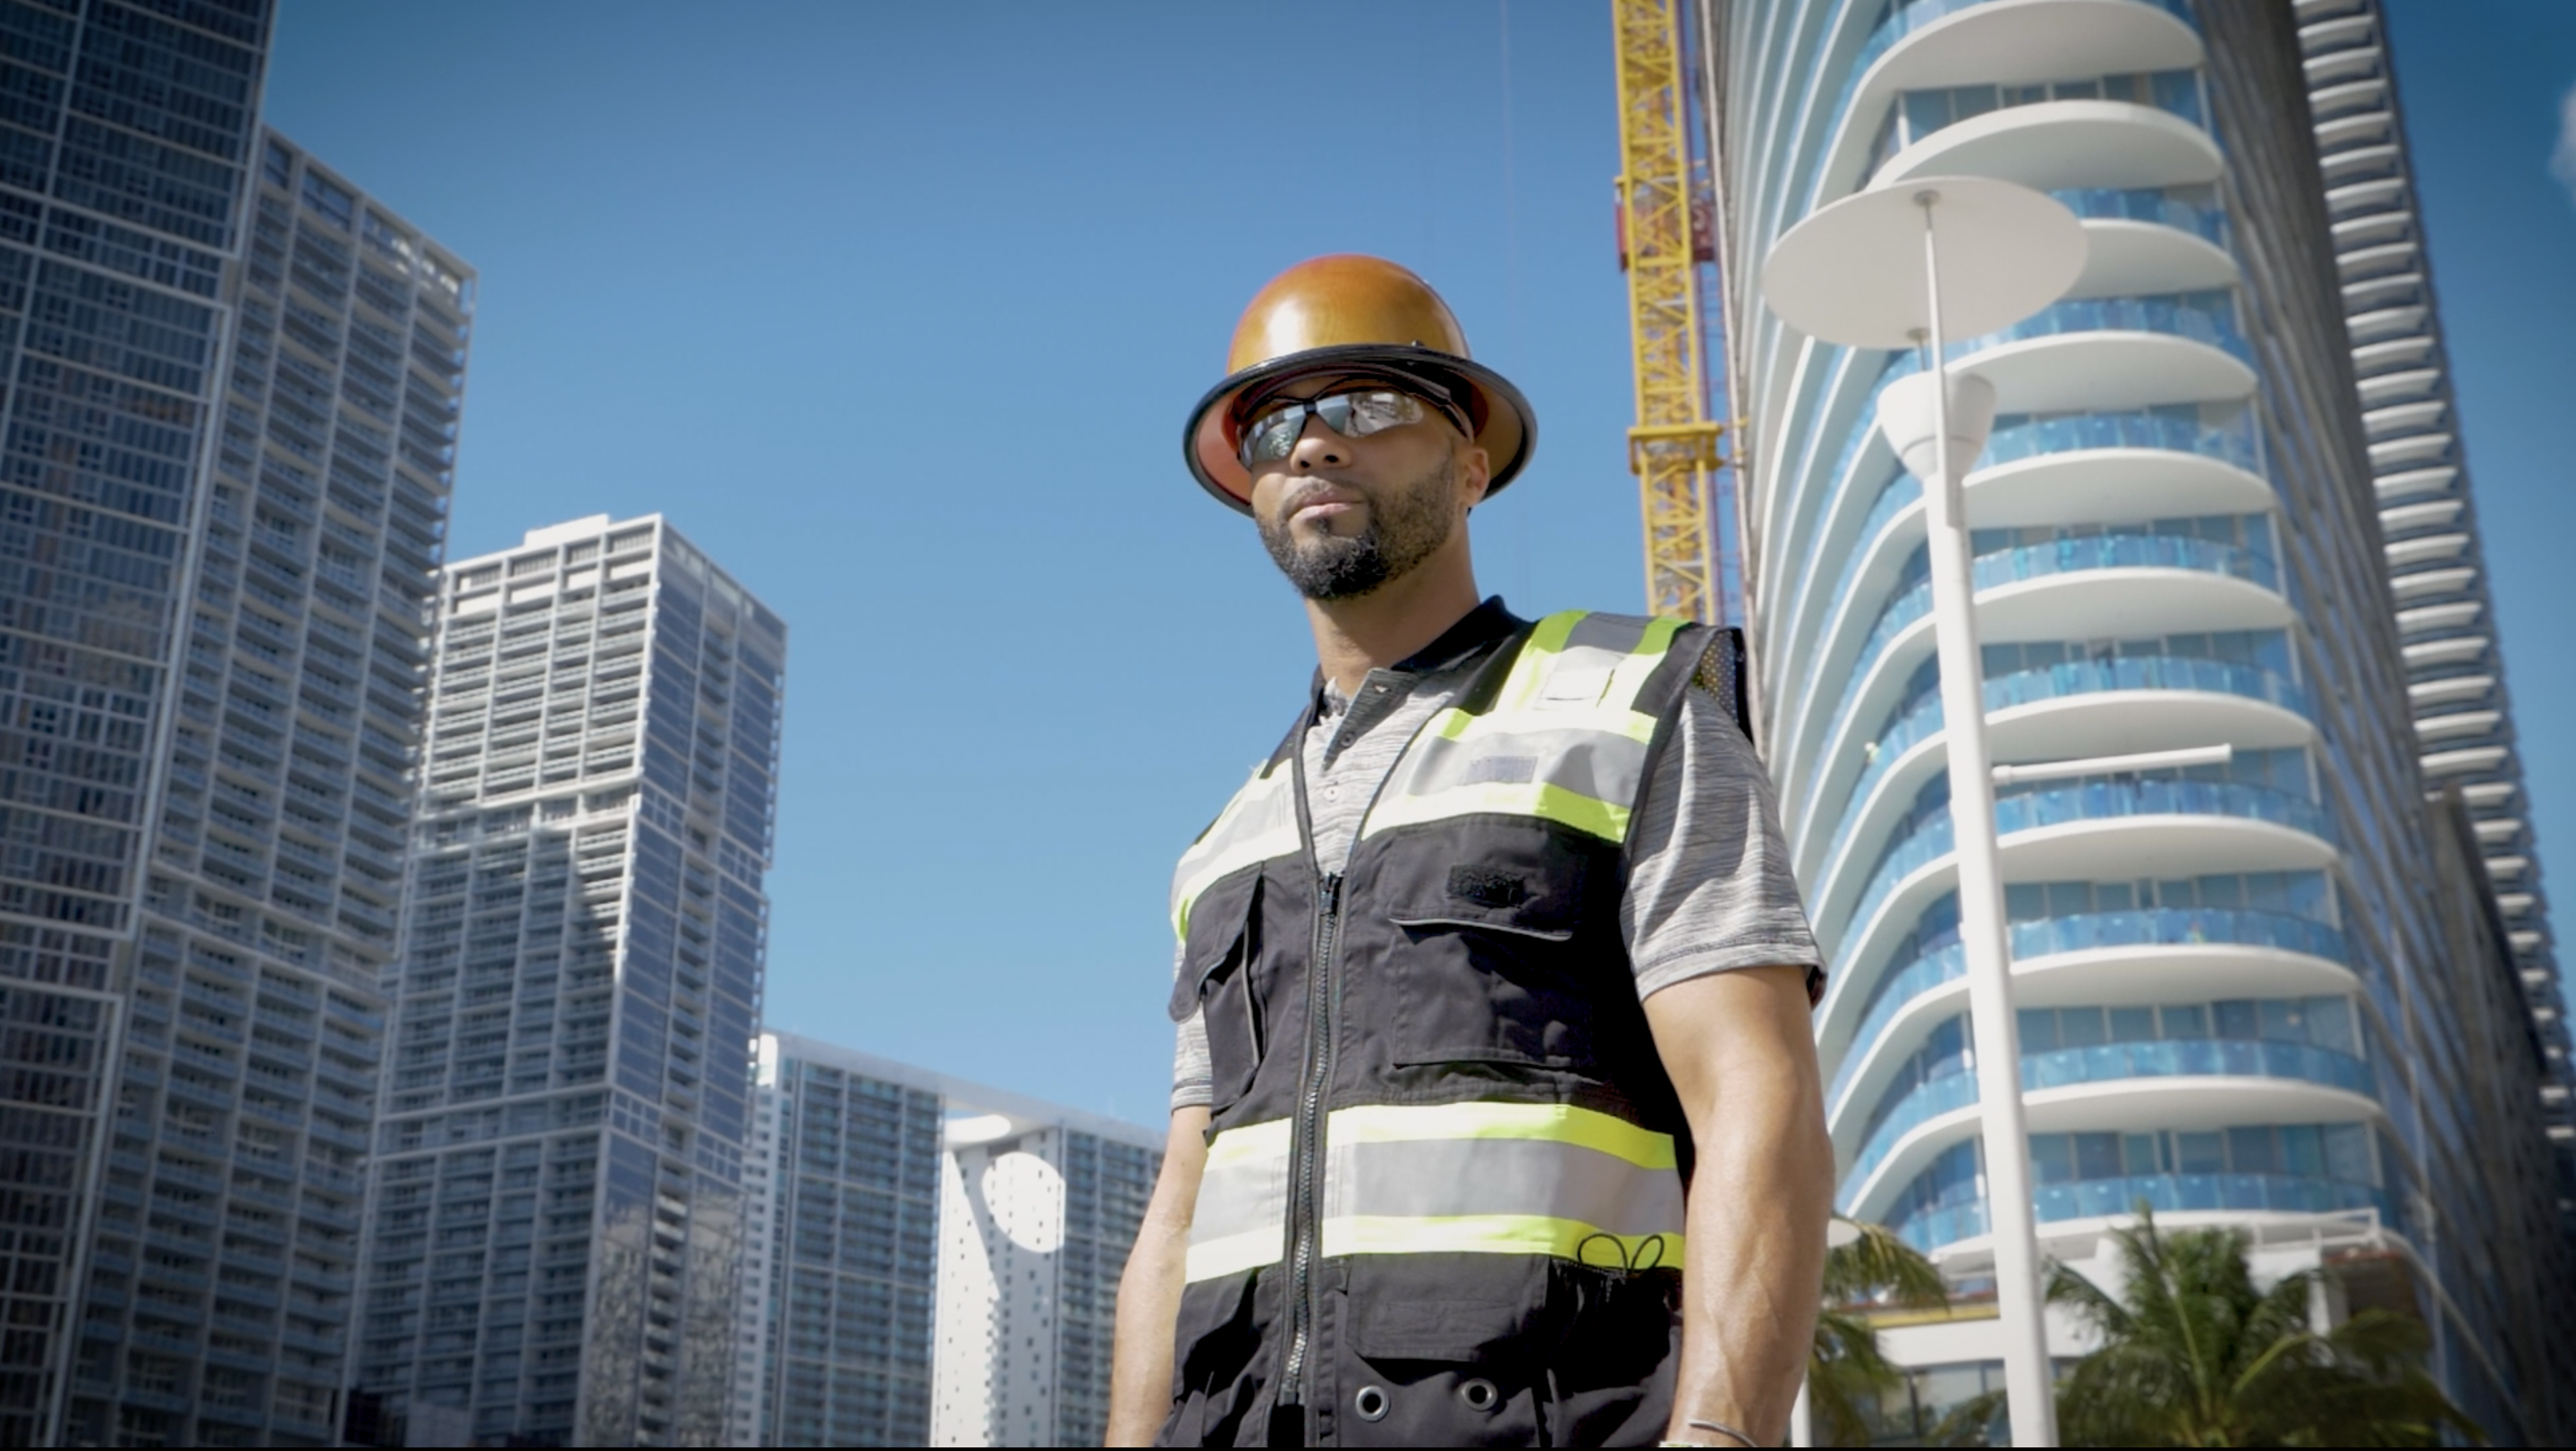 FIU’s Certificate Program on Construction Trades, powered by the Lennar Foundation, provides underserved members of the community with jobs